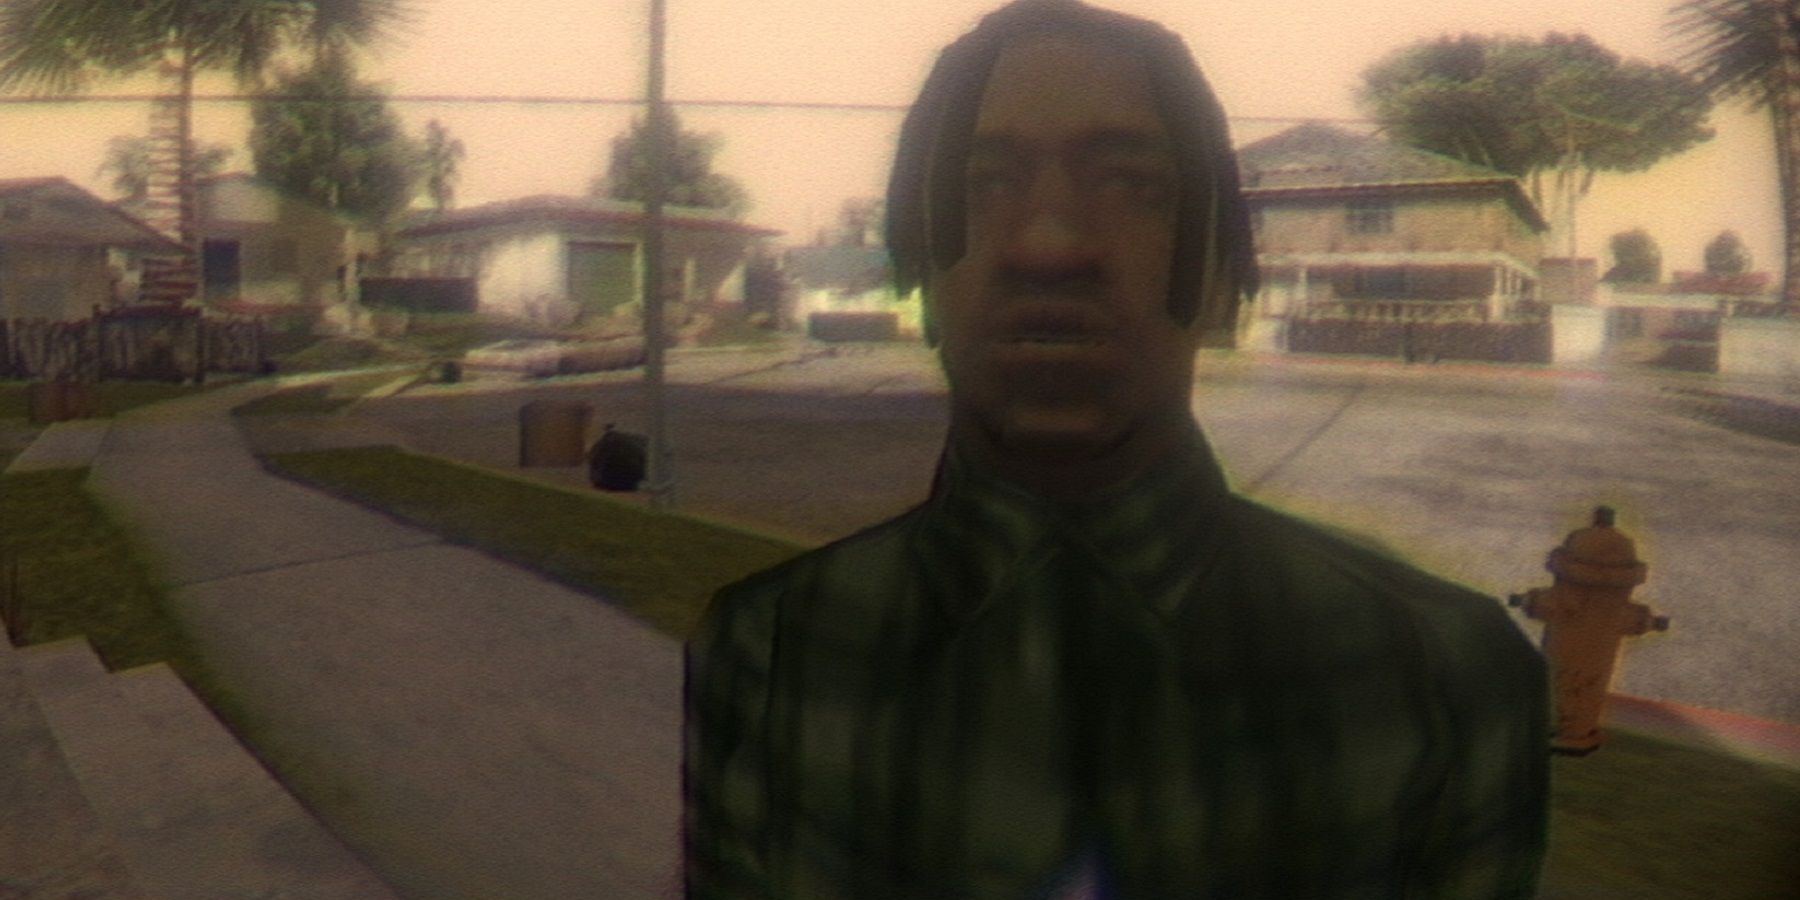 GTA: San Andreas Fan Project Turns the Sandbox Game Into a
Horror Experience